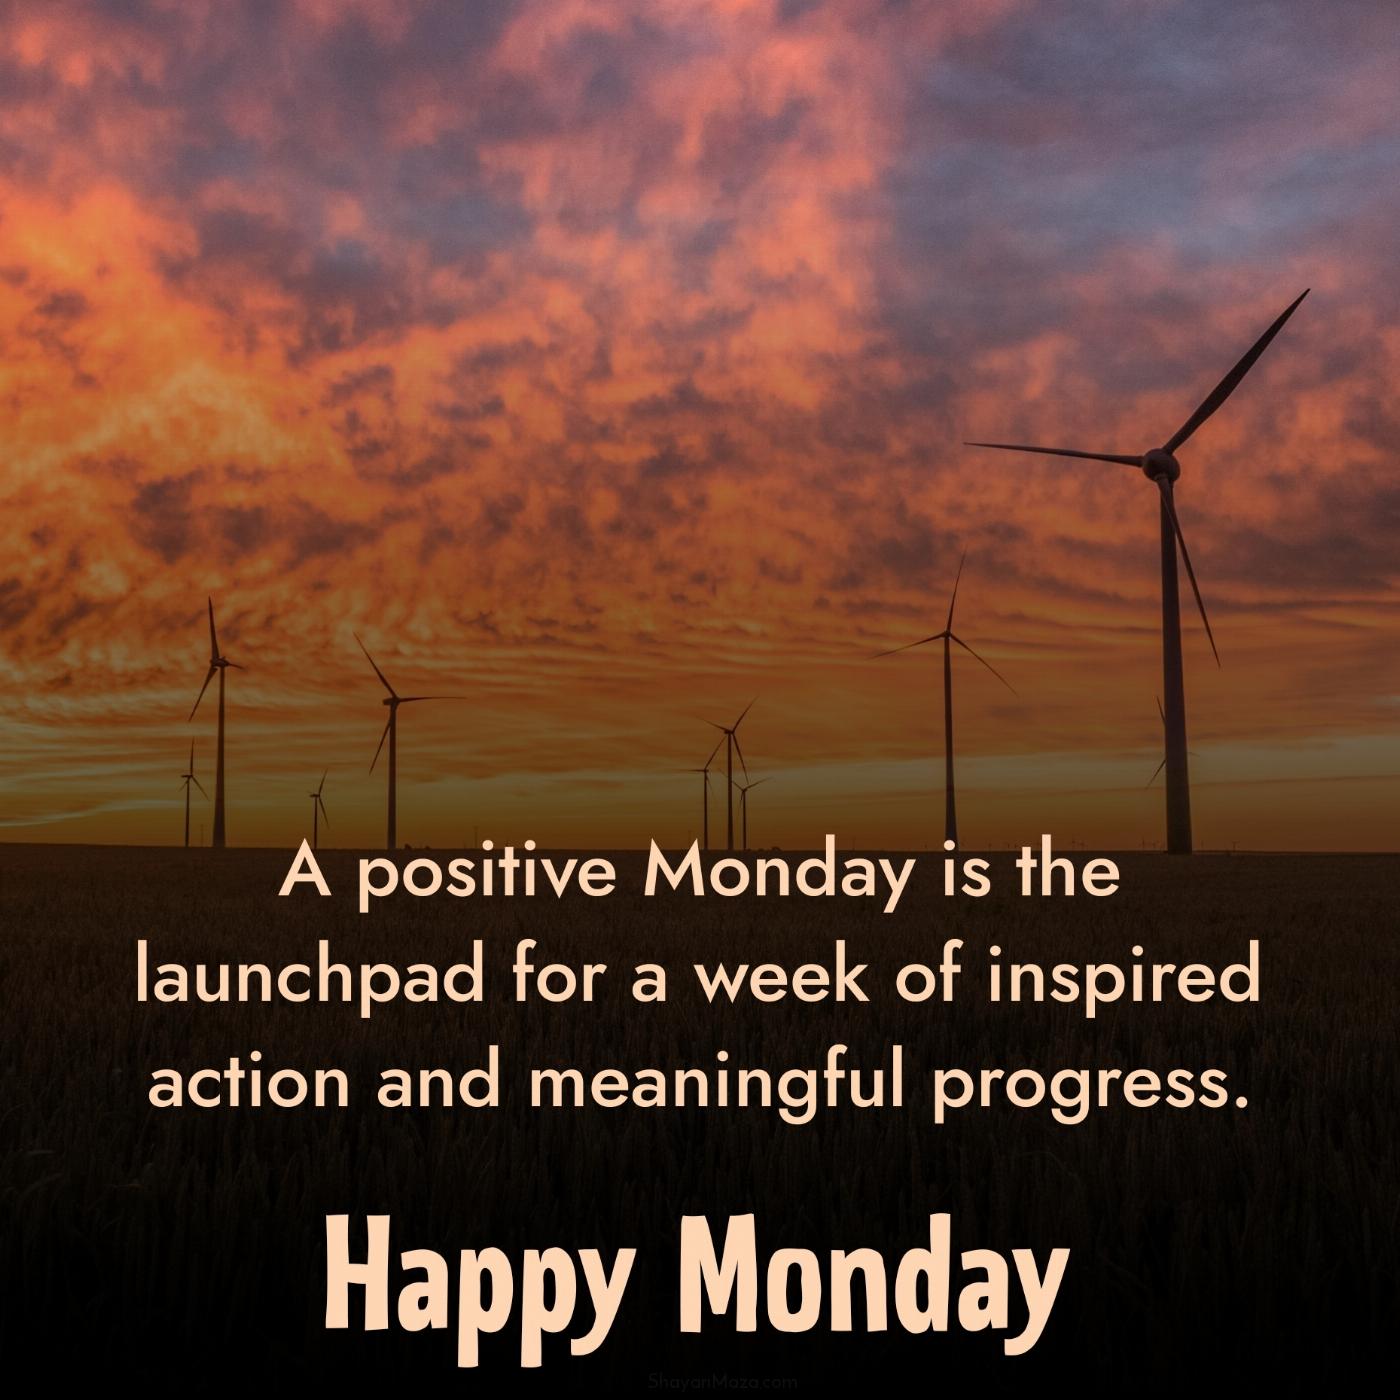 A positive Monday is the launchpad for a week